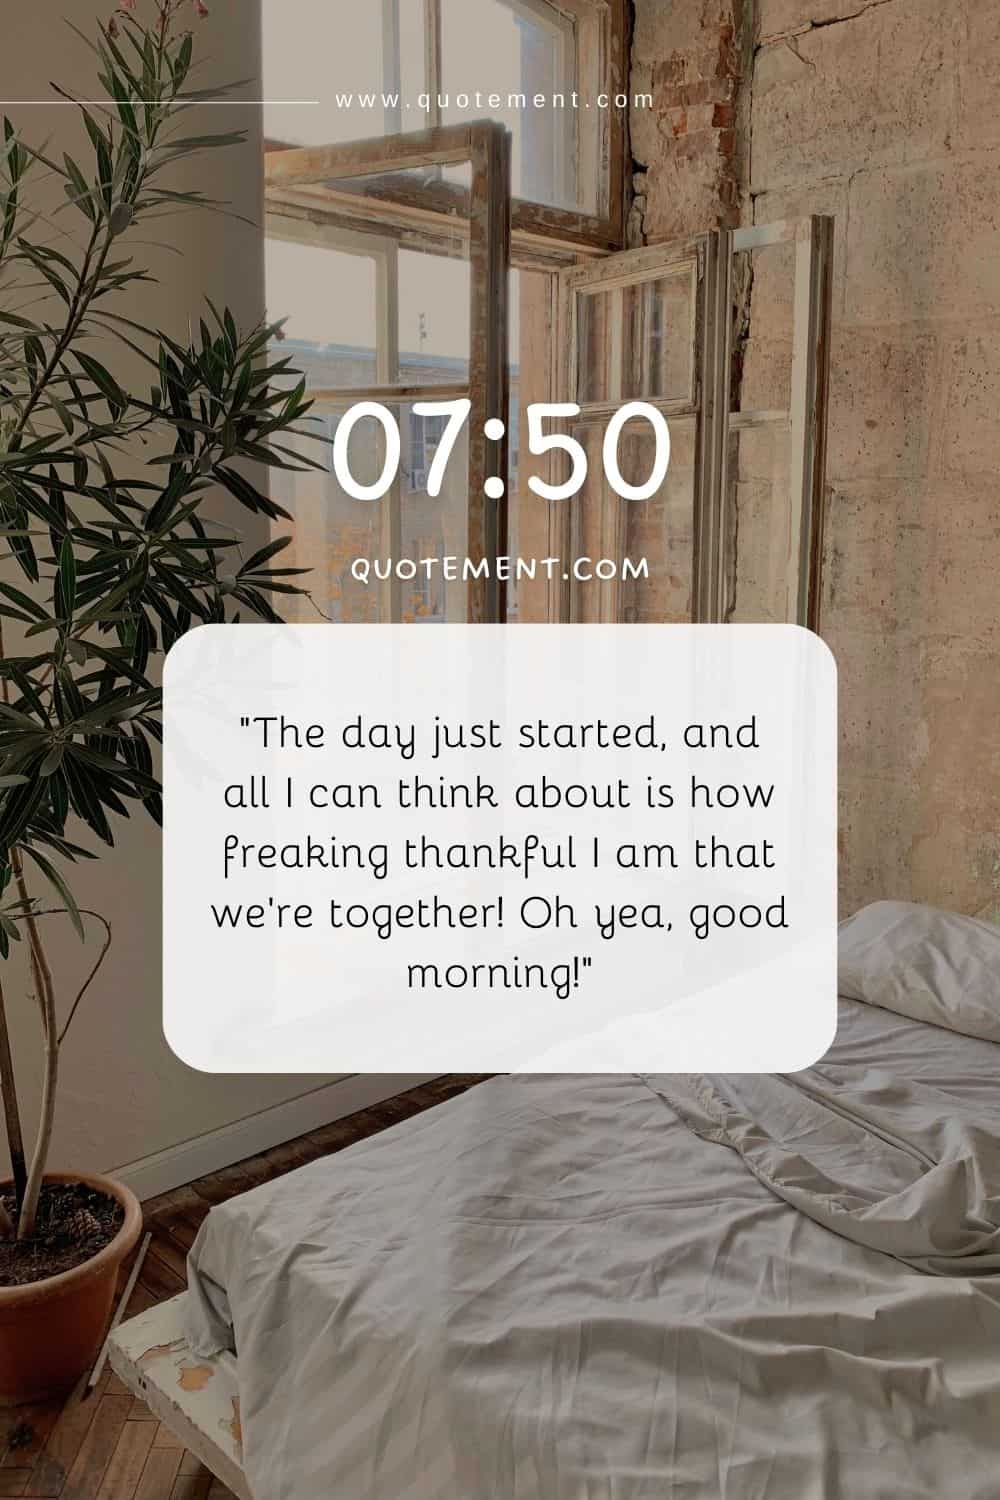 message placed on a phone screen featuring a cozy bedroom design